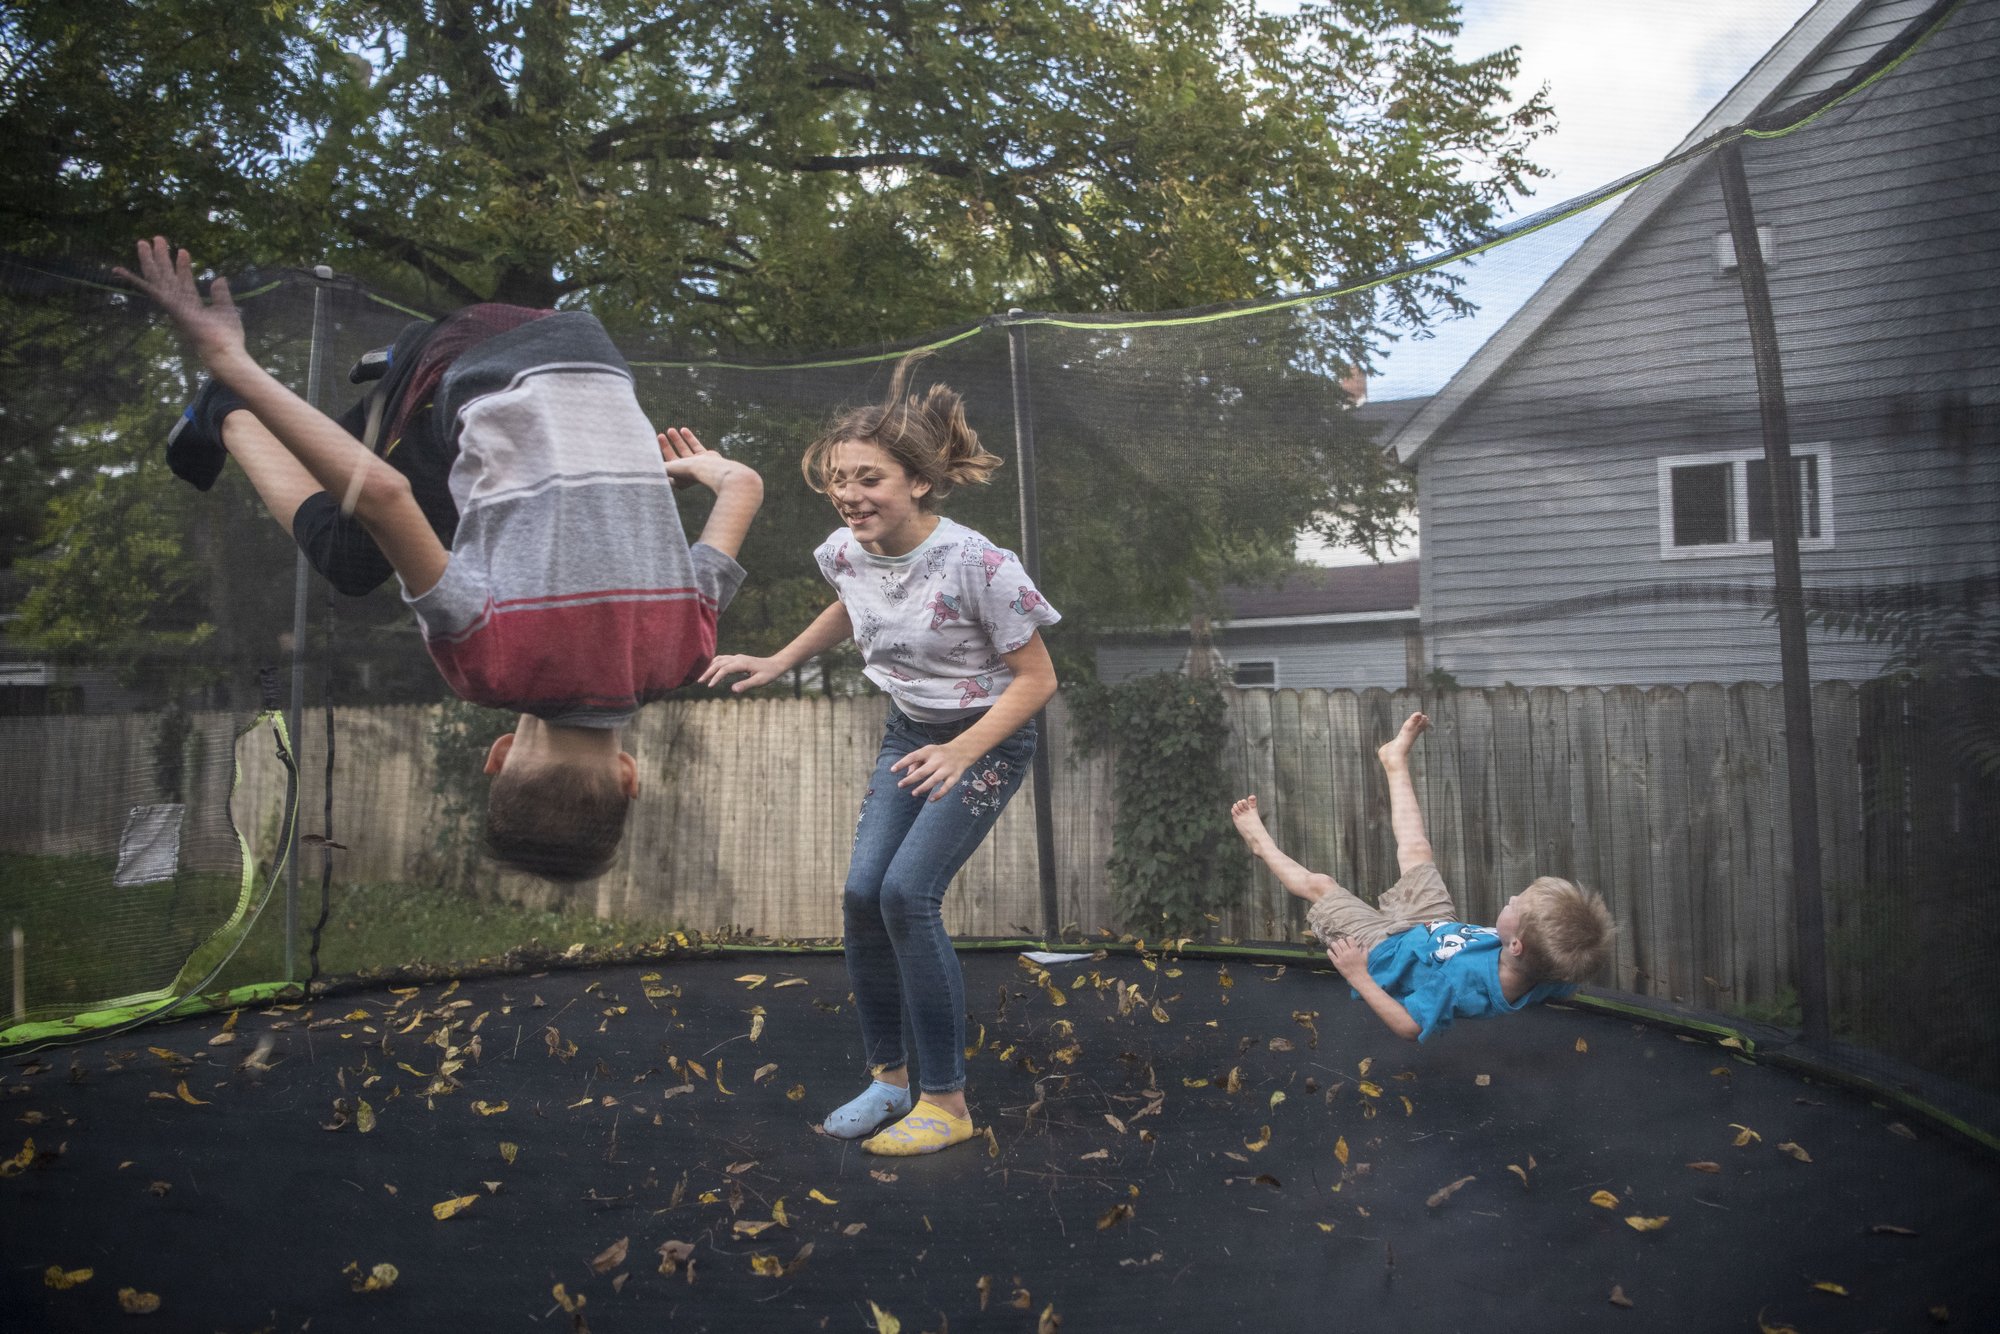  Matthew Murray, 9, Hannah Fox, 10, and Miles Murray, 4, jump on their trampoline at their home in Athens, Michigan on Monday, Oct. 4. 